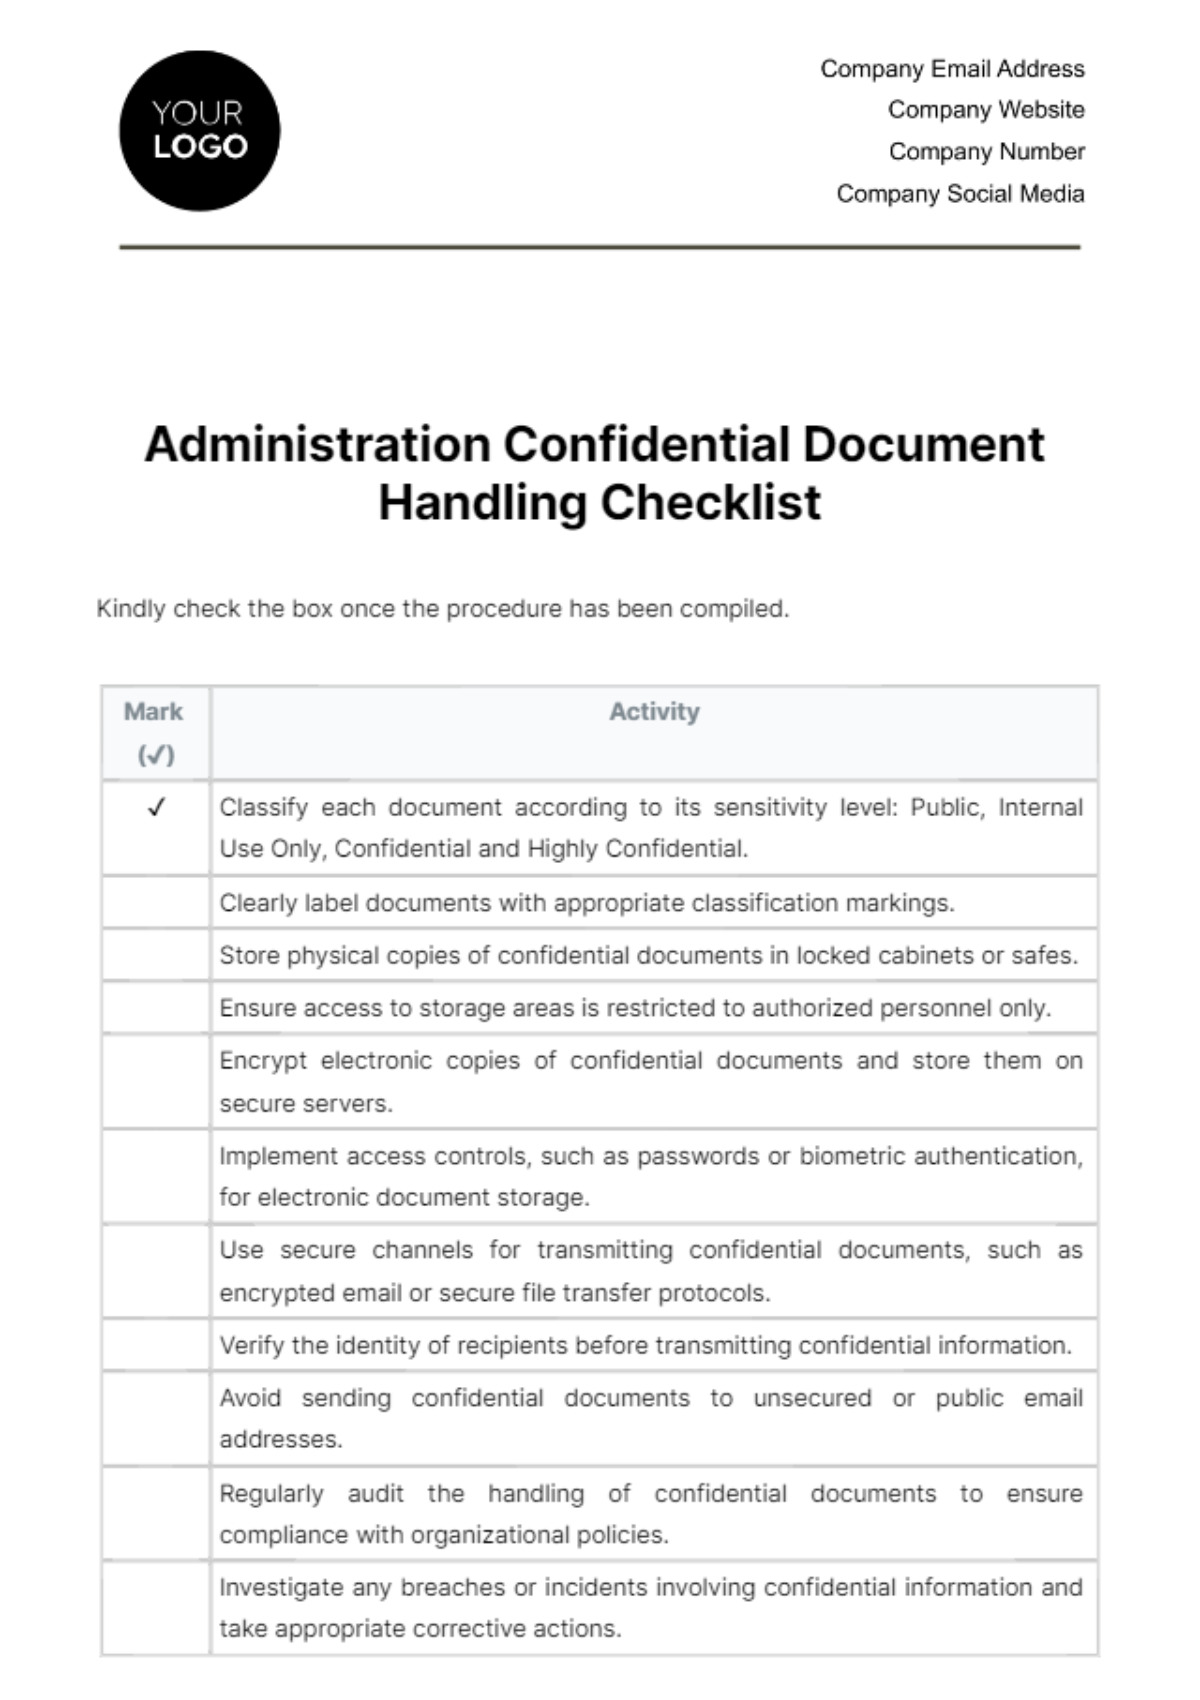 Administration Confidential Document Handling Checklist Template